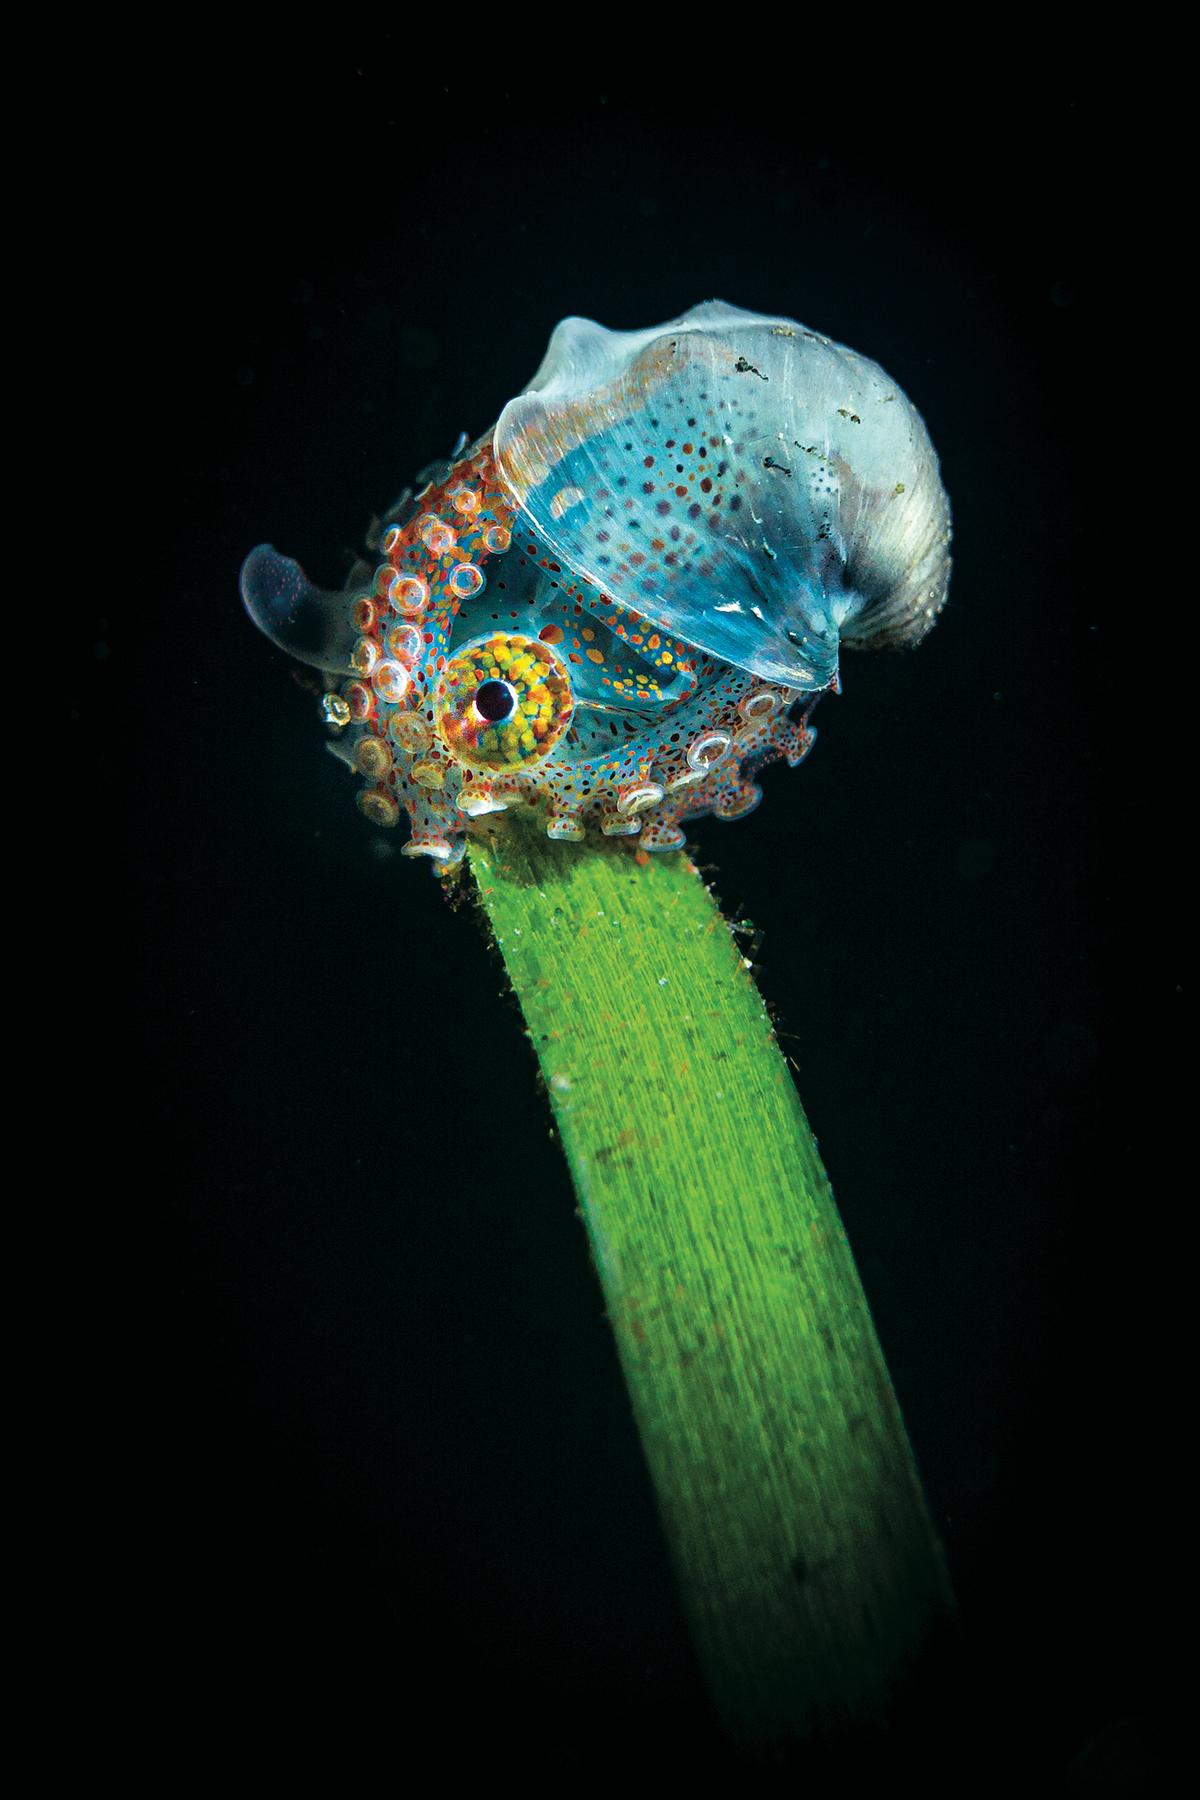  1st place, Compact Camera (Courtesy of Tobias Friedrich/<a href="https://www.scubadiving.com/scuba-diving-magazines-2020-underwater-photo-contest-winners">Scuba Diving magazine</a>)